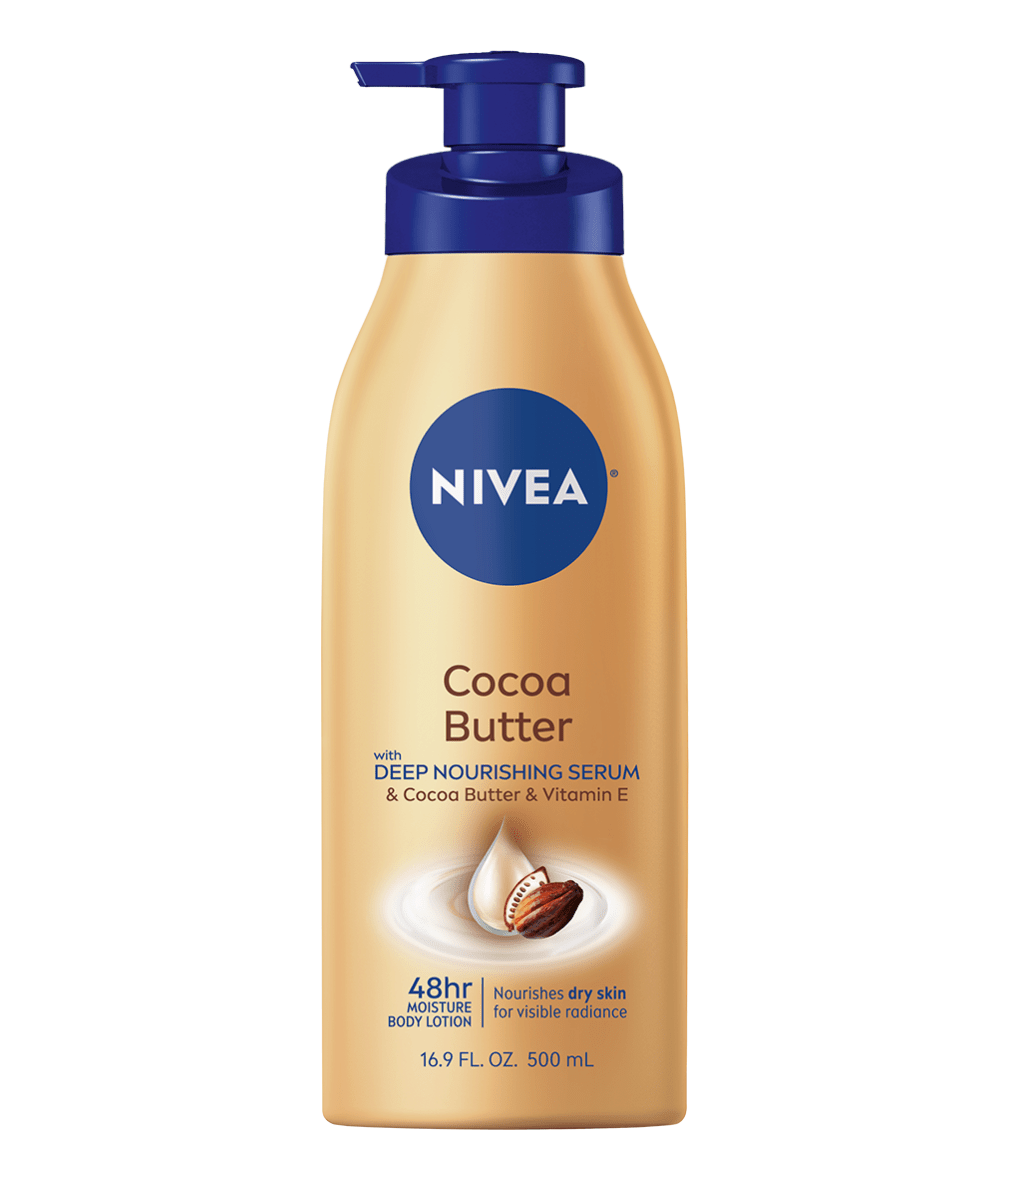 BEST BODY LOTION FOR FLAWLESS SKIN: Nivea Perfect & Radiant Body